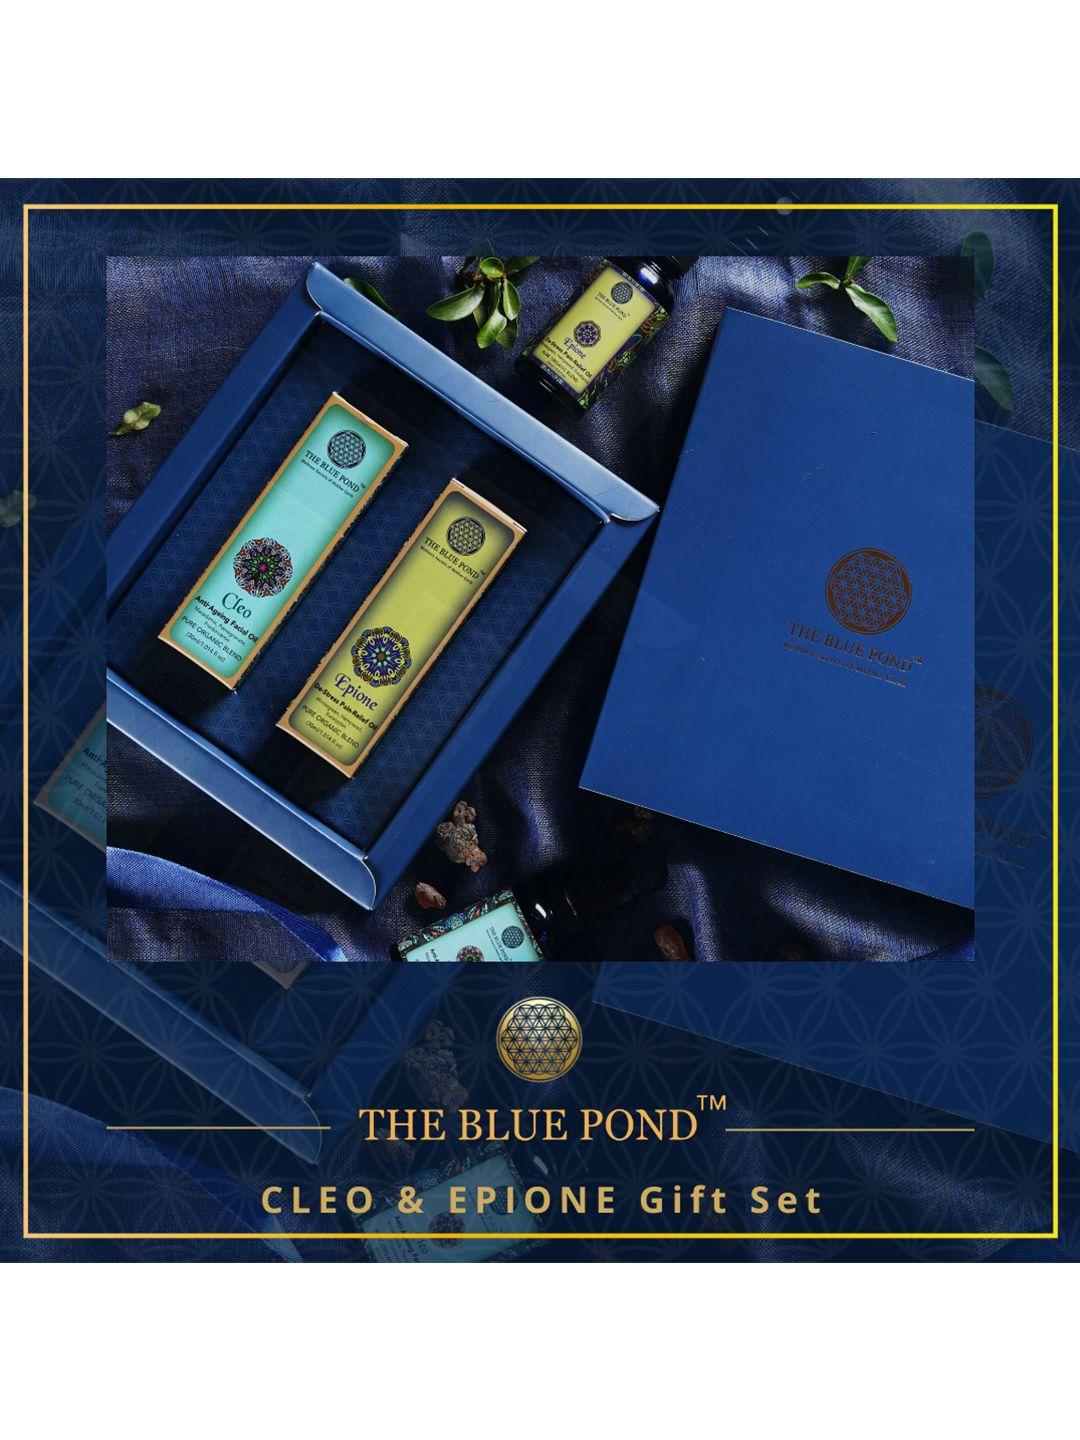 the blue pond set of cleo anti-ageing serum & epione de-stress & pain-relief oil-30ml each